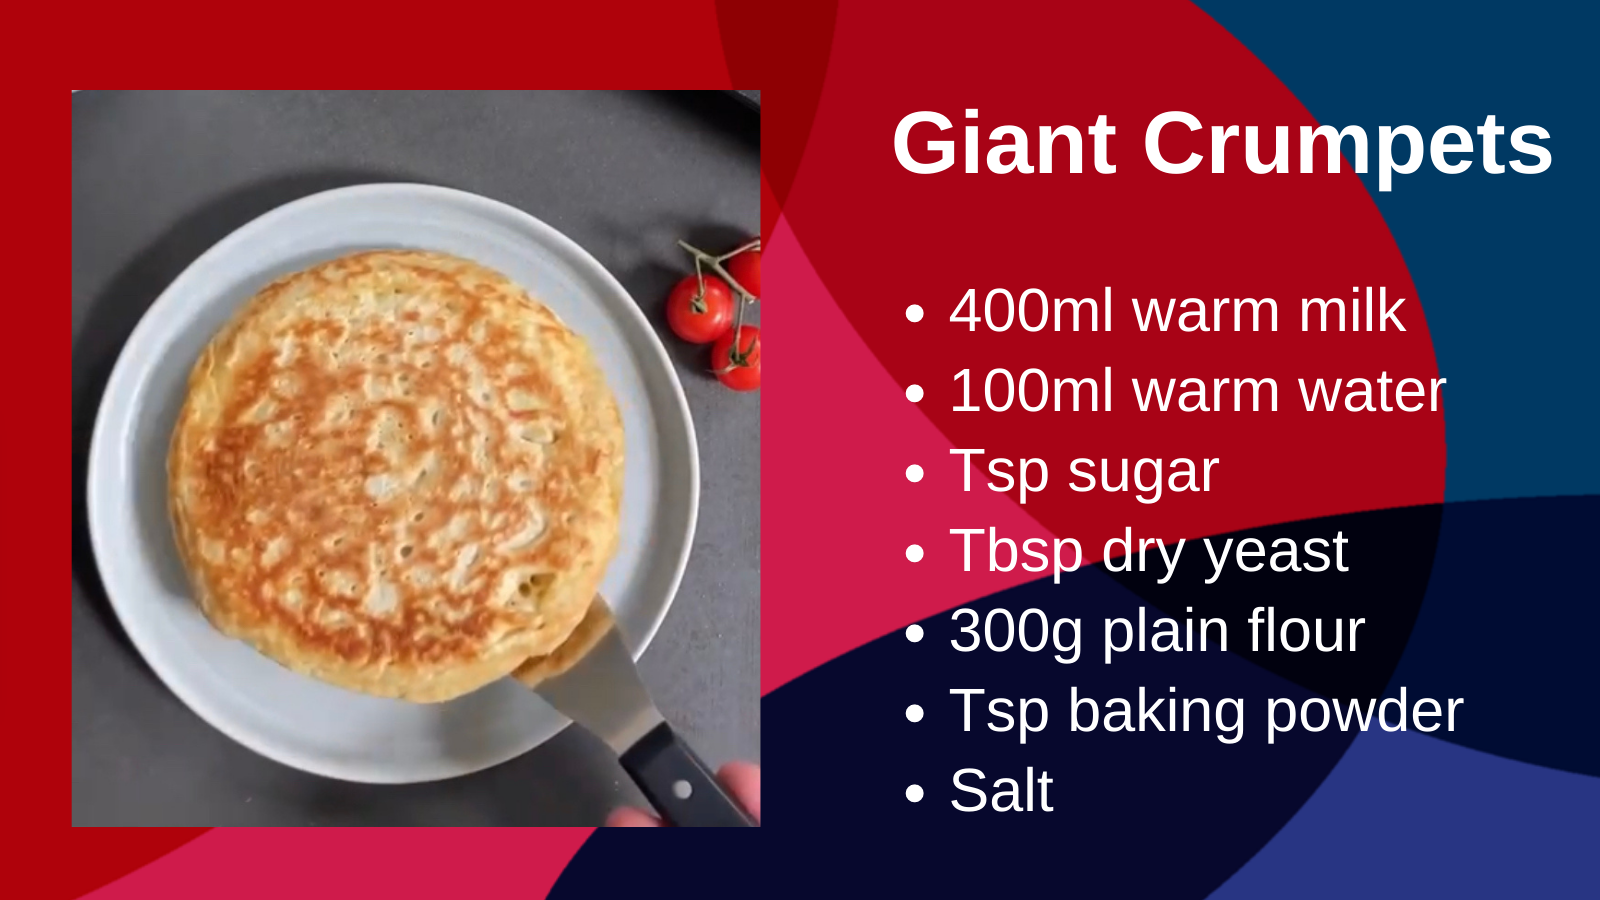 Crumpets recipe from UKAD Athlete Commission Member Christian Day